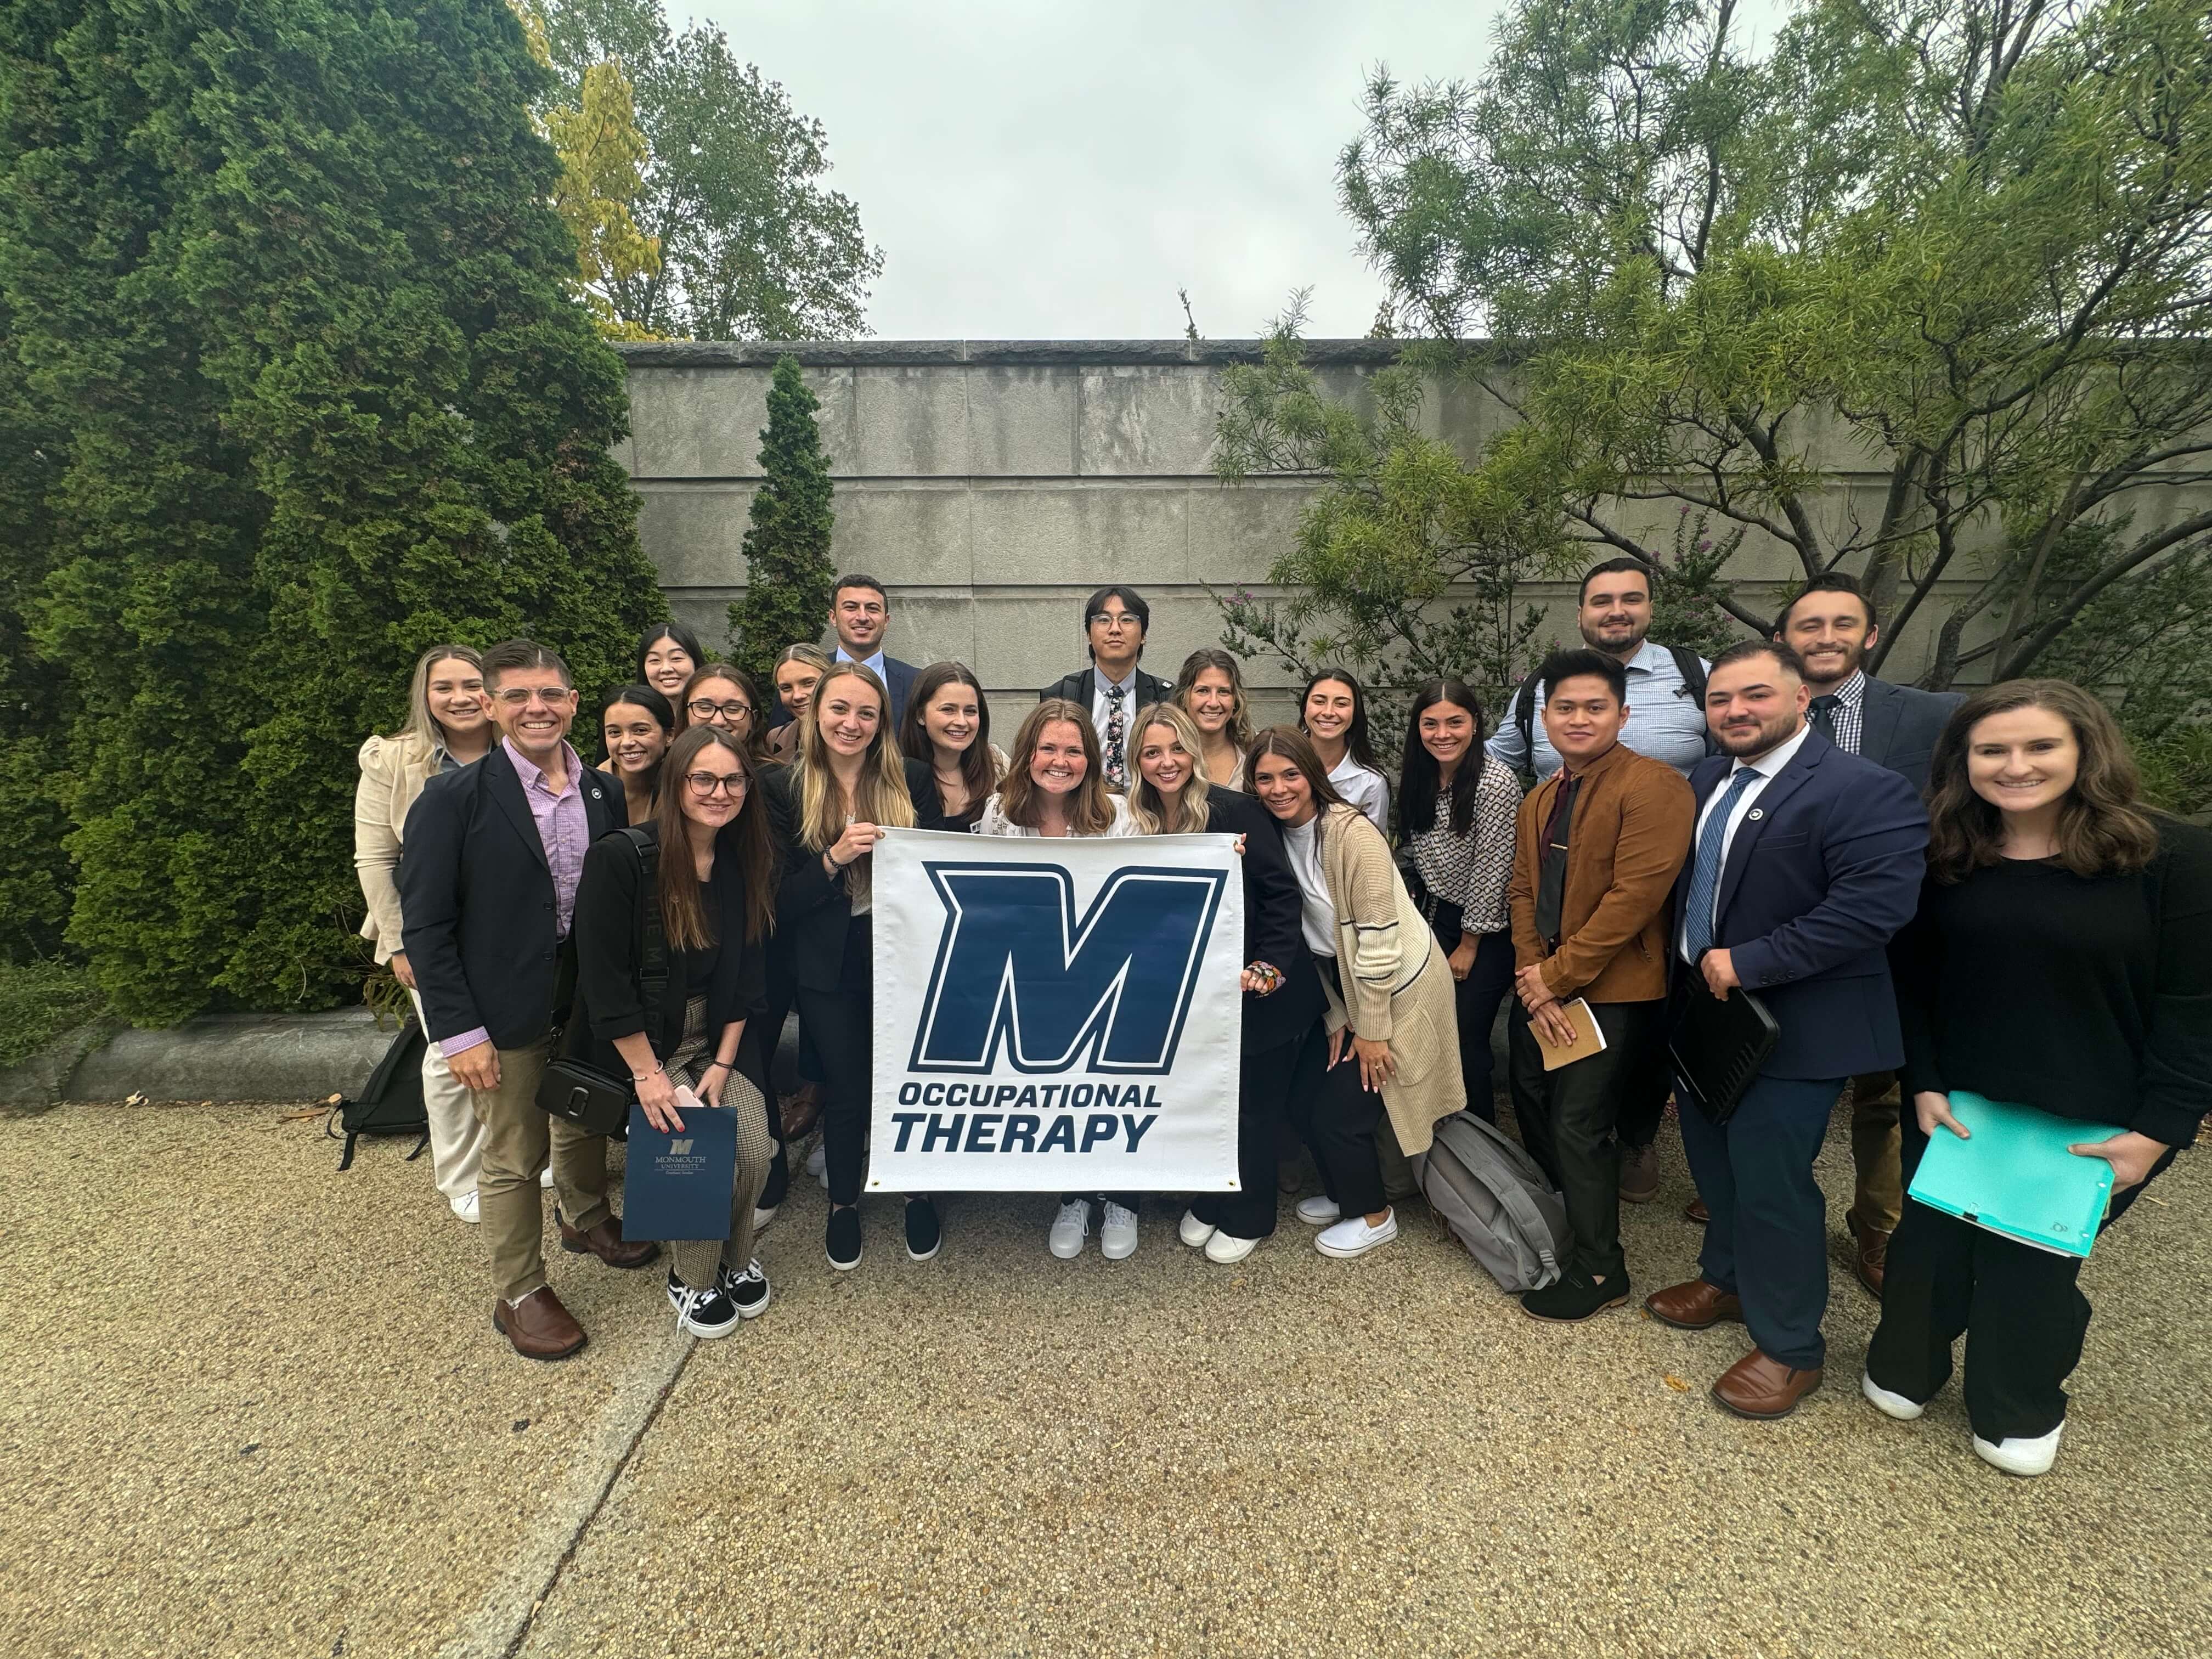 Monmouth OTD Students visit Washing ton DC, holding banner for Occupational Therapy program